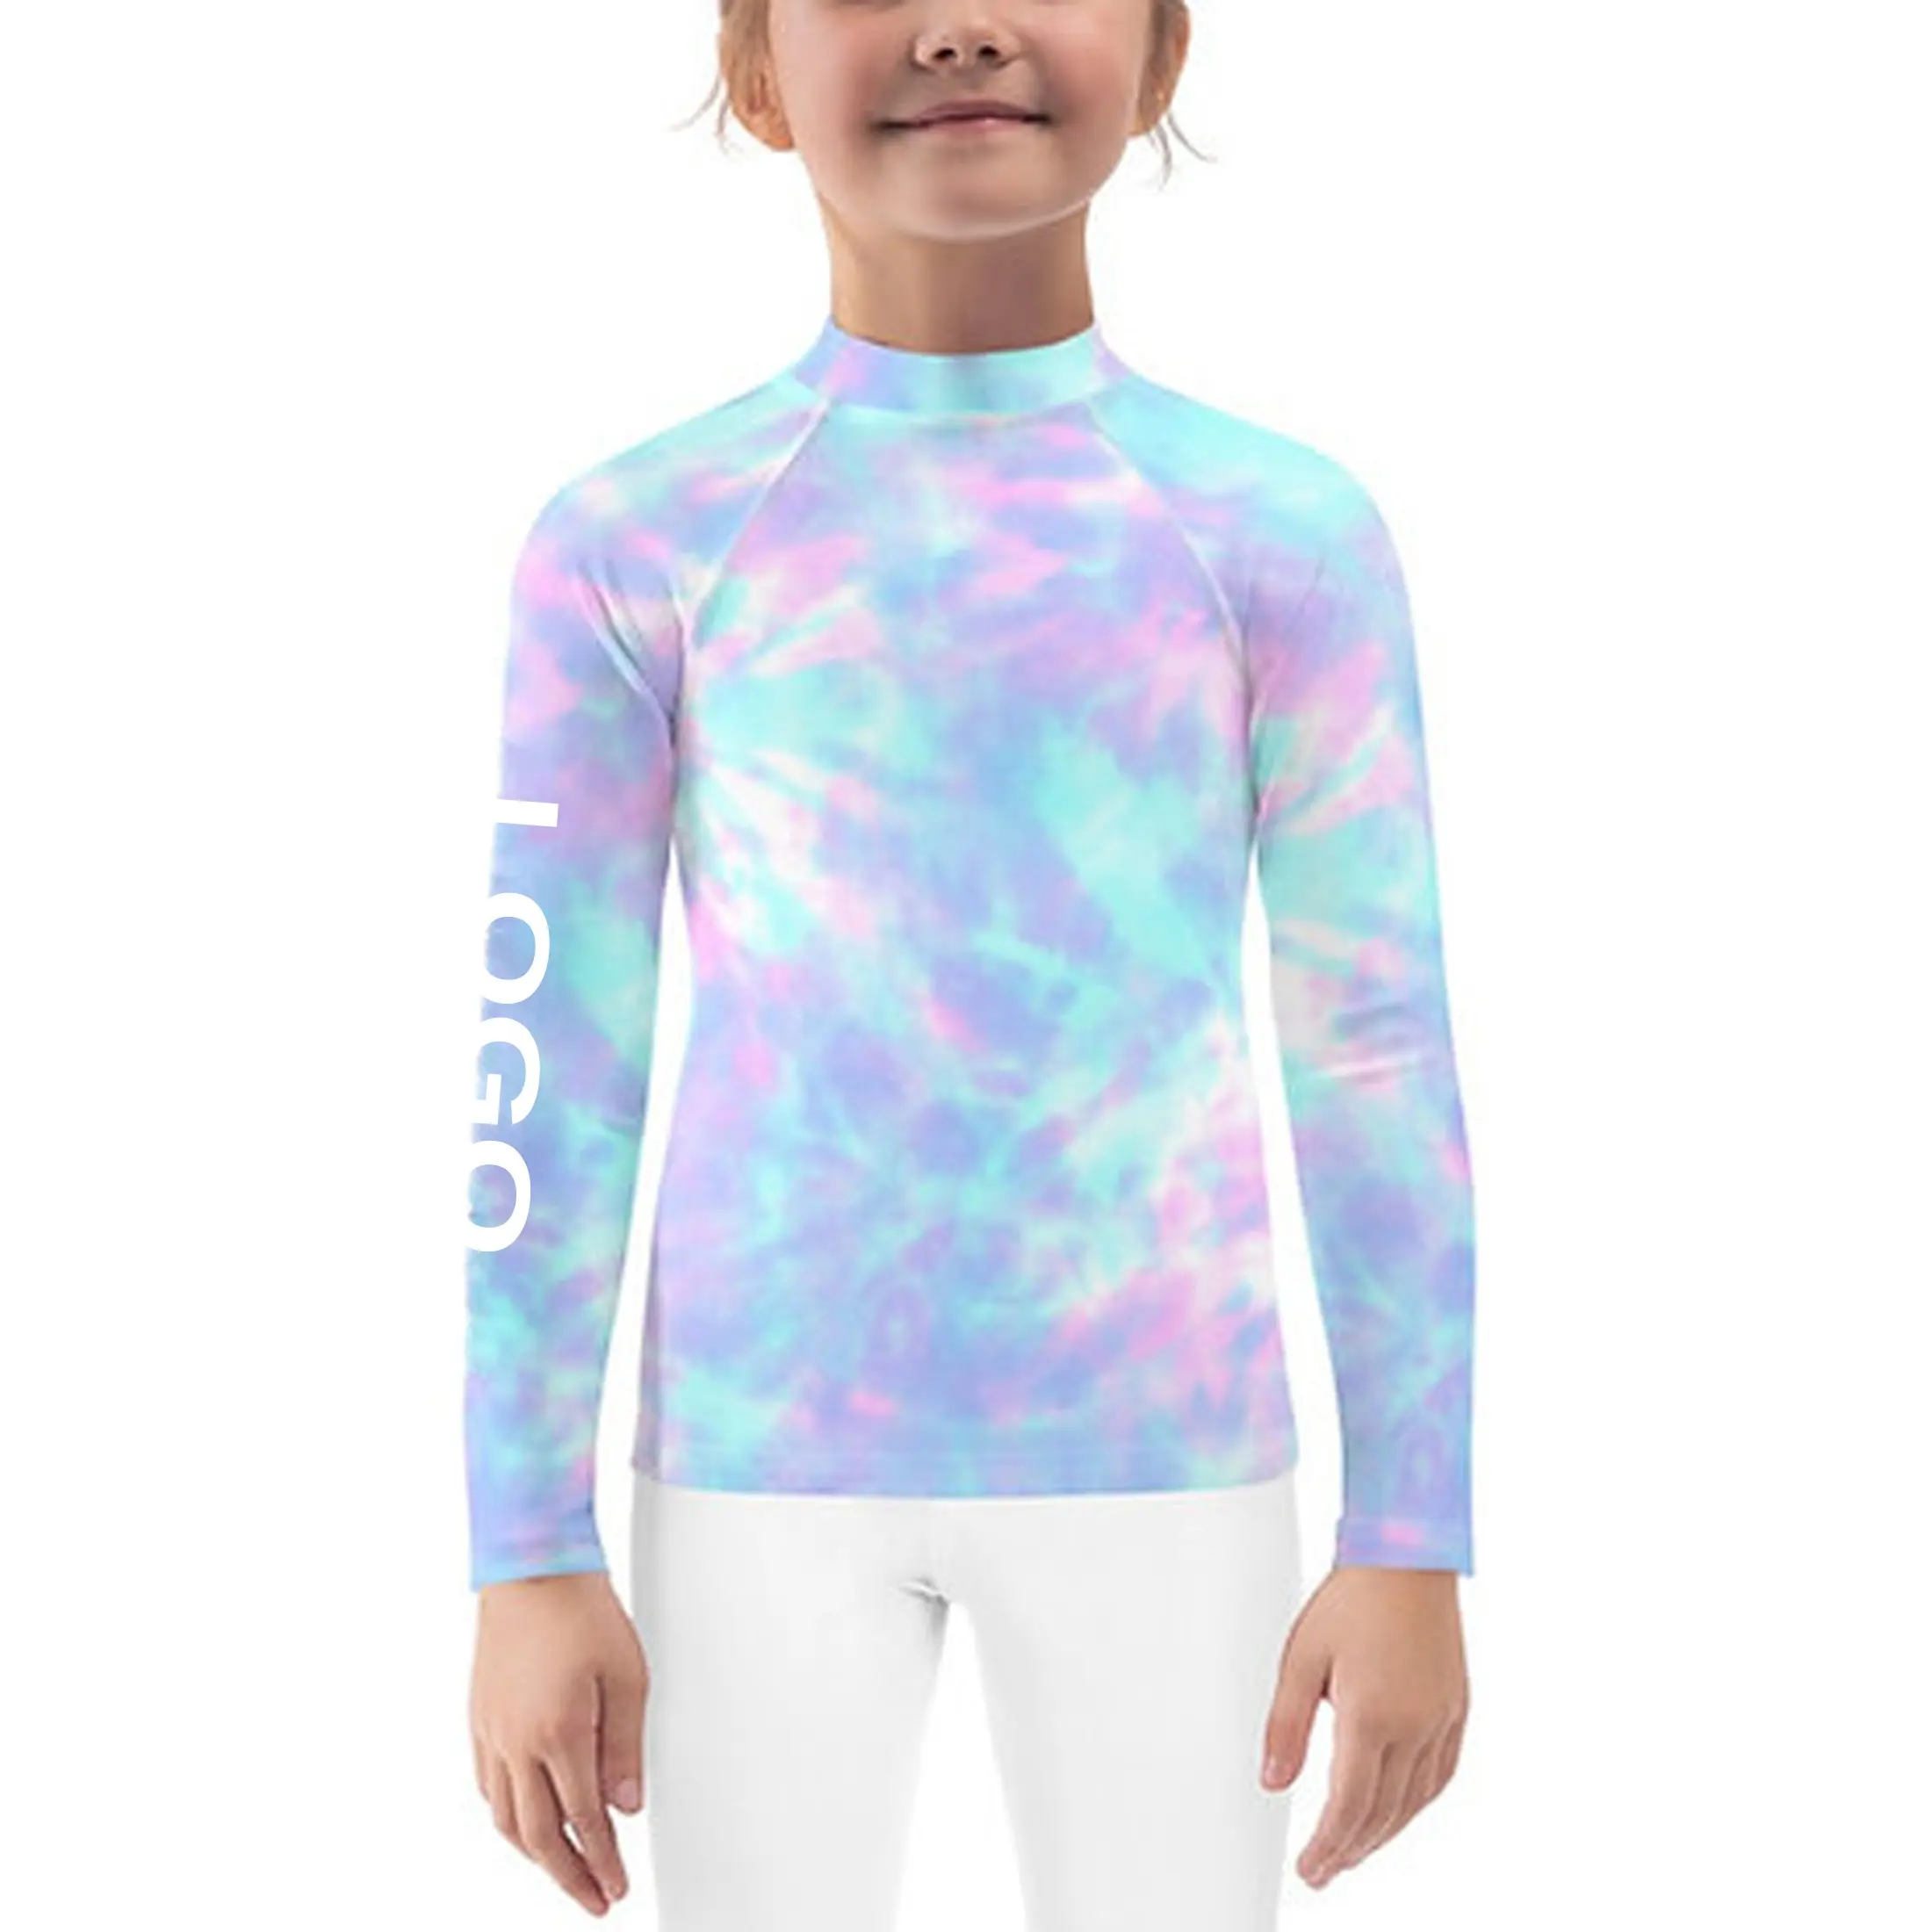 High Quality Horse Riding Shirts Custom Children Equestrian Sublimation Printed Kids Base Layer On Quick Dry Technical Fabric